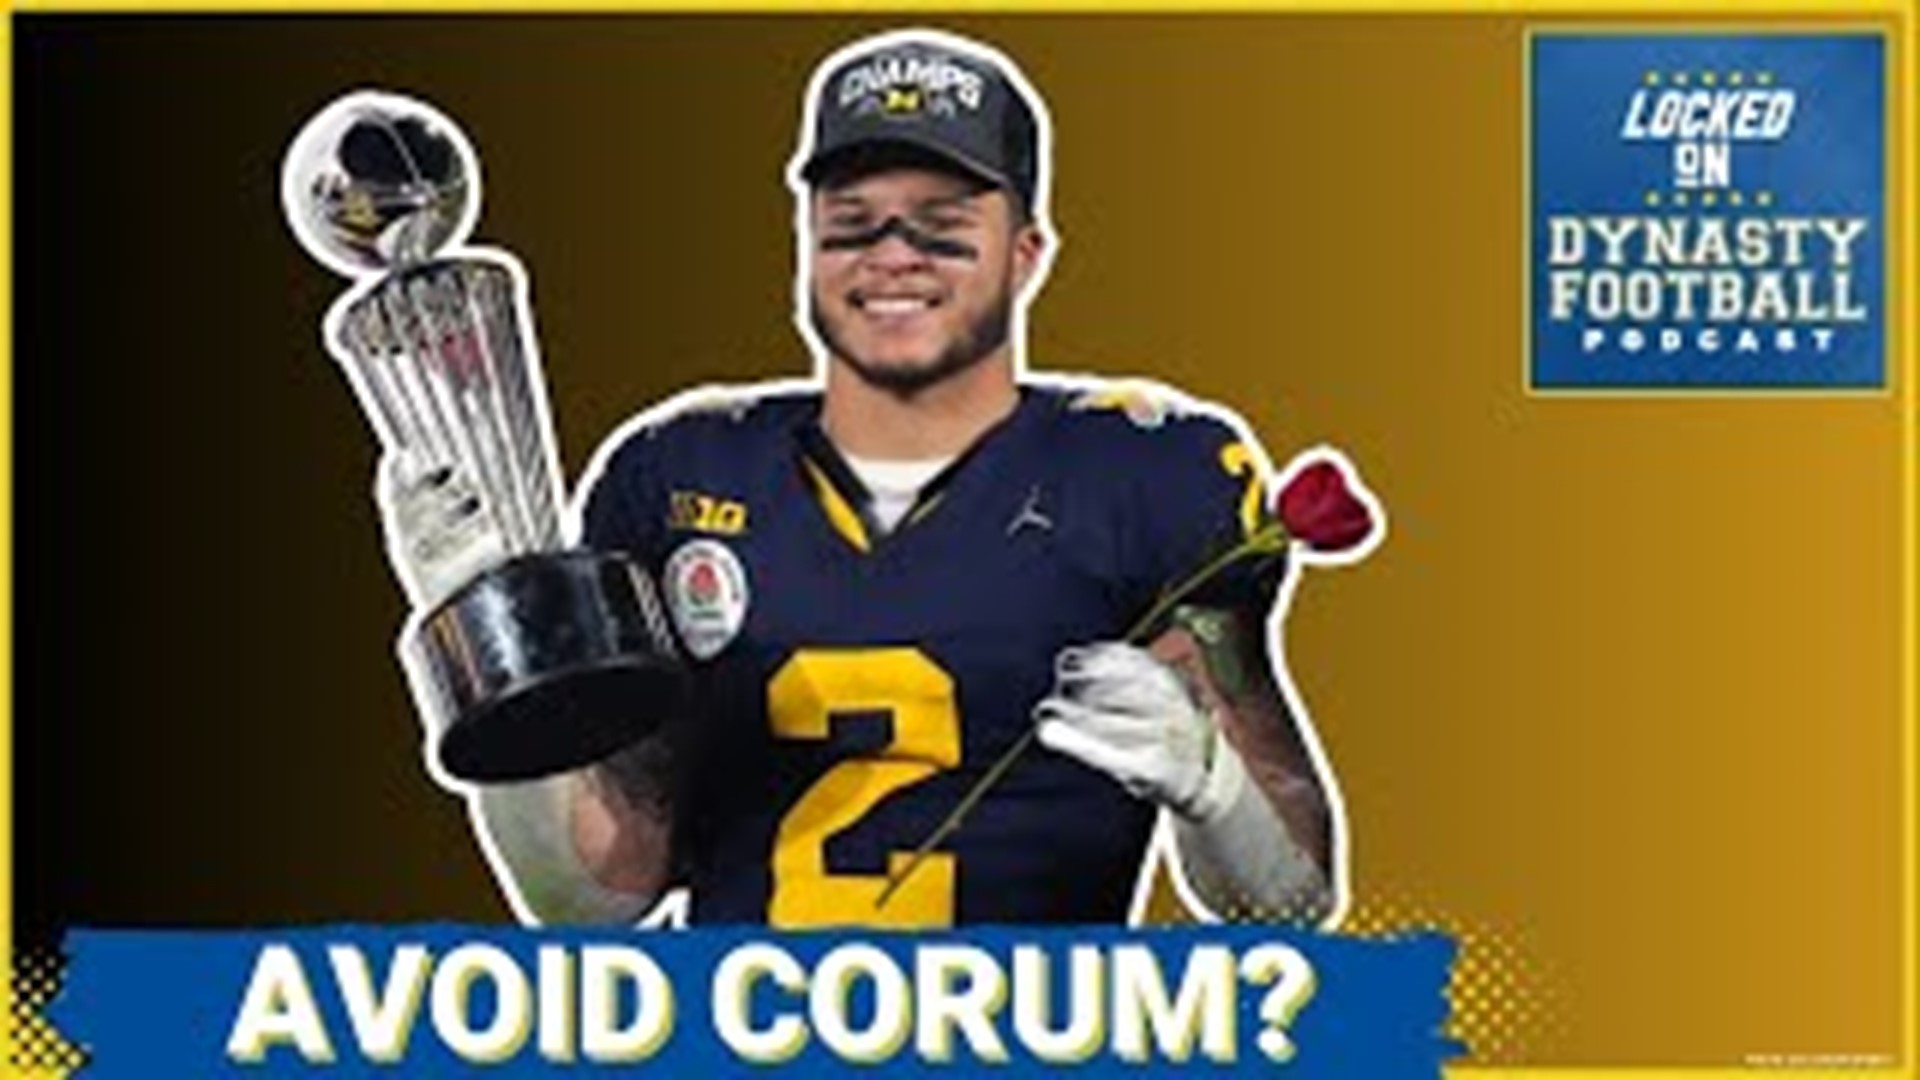 Michigan RB Blake Corum is one of the most prolific running backs in college football history. But should he be someone you target in your dynasty leagues?